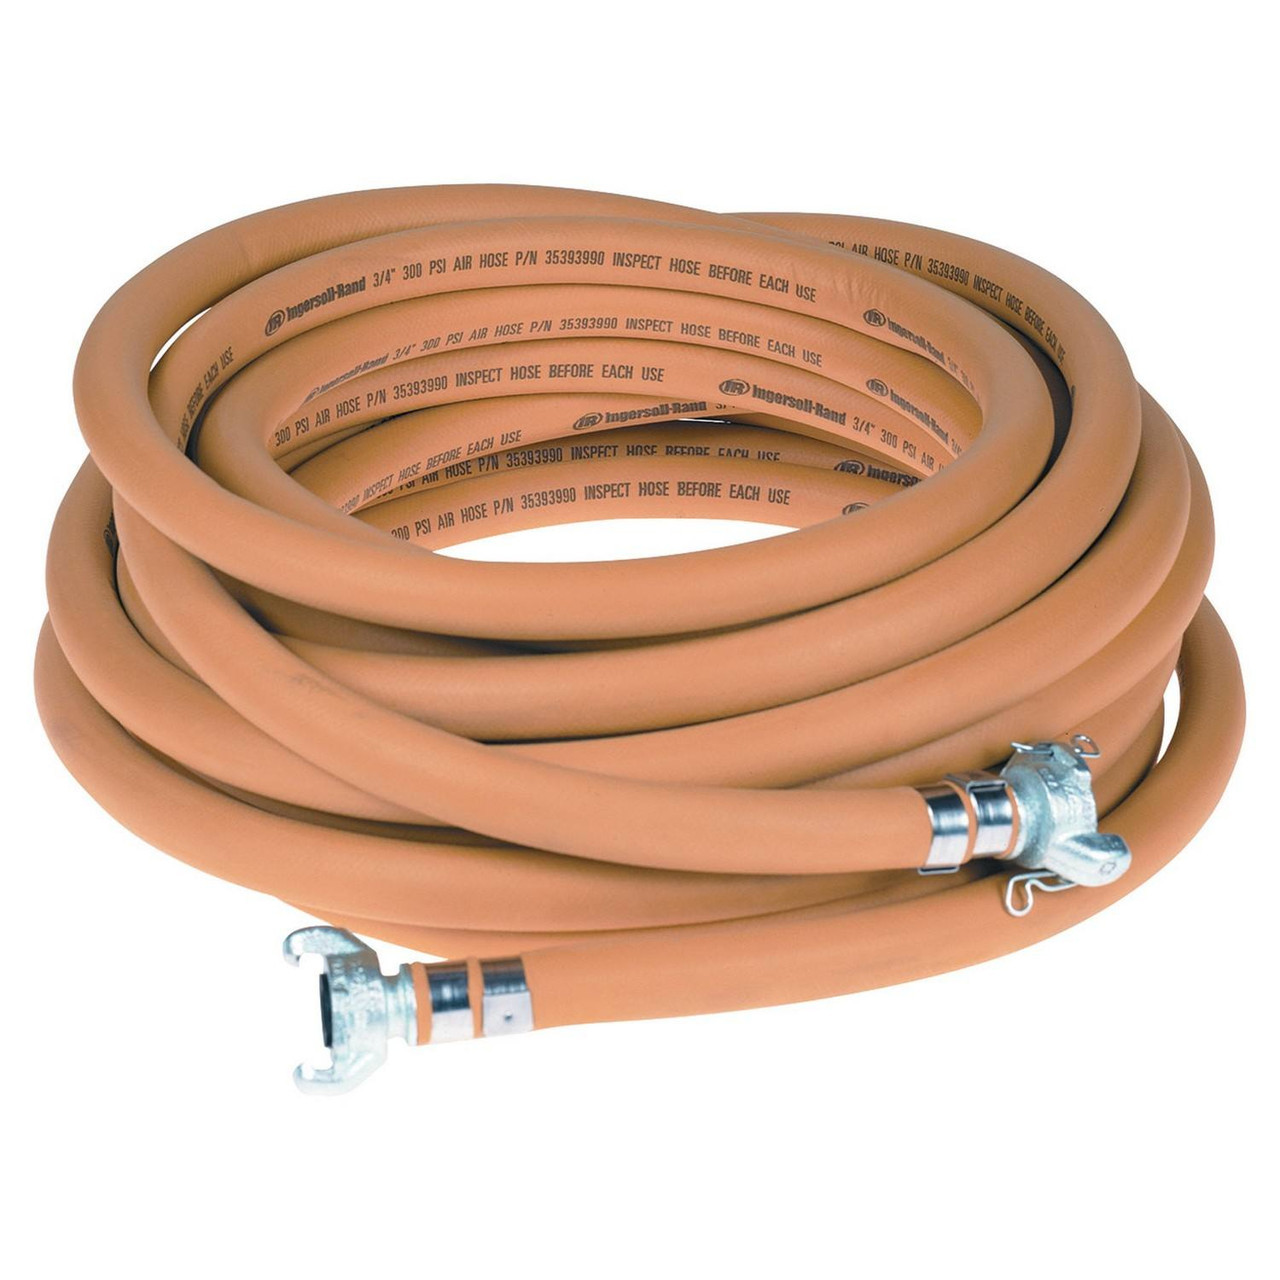 Search results for: '100 flow 1 2 air hose rear' - Hydraulics, Pneumatics  and Power Transmission at Beiler Hydraulics